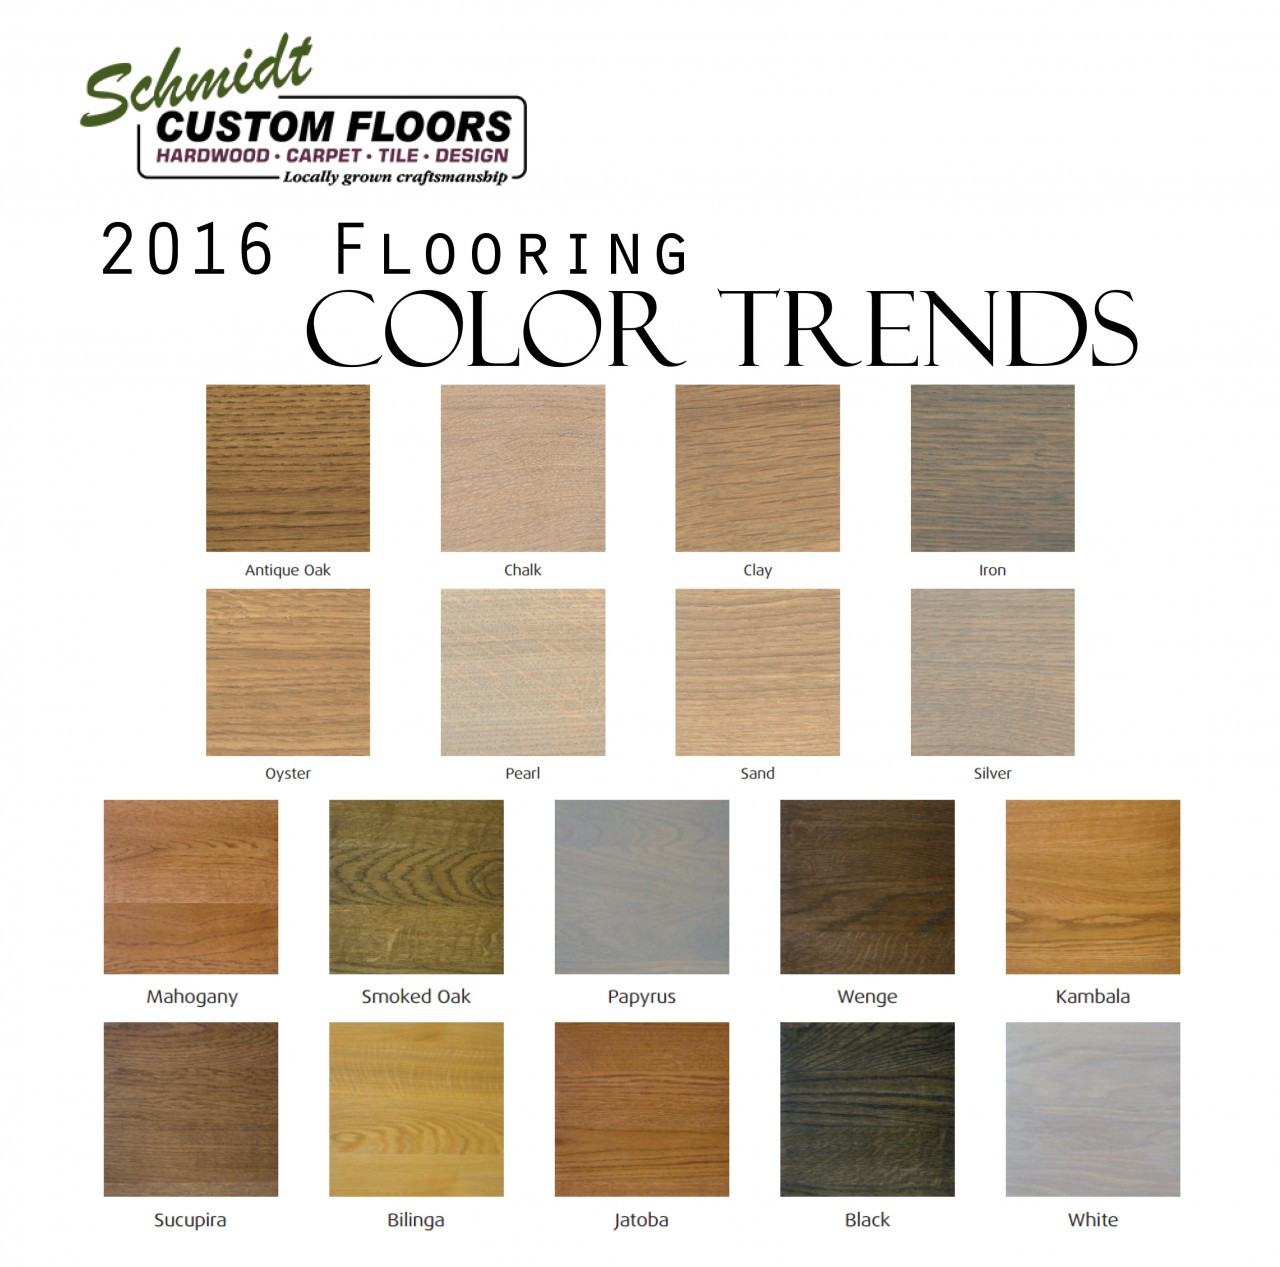 11 Famous Hardwood Flooring Trends for 2017 2022 free download hardwood flooring trends for 2017 of hardwood flooring colors 2017 beste awesome inspiration for 2017 hardwood floor trends color trends